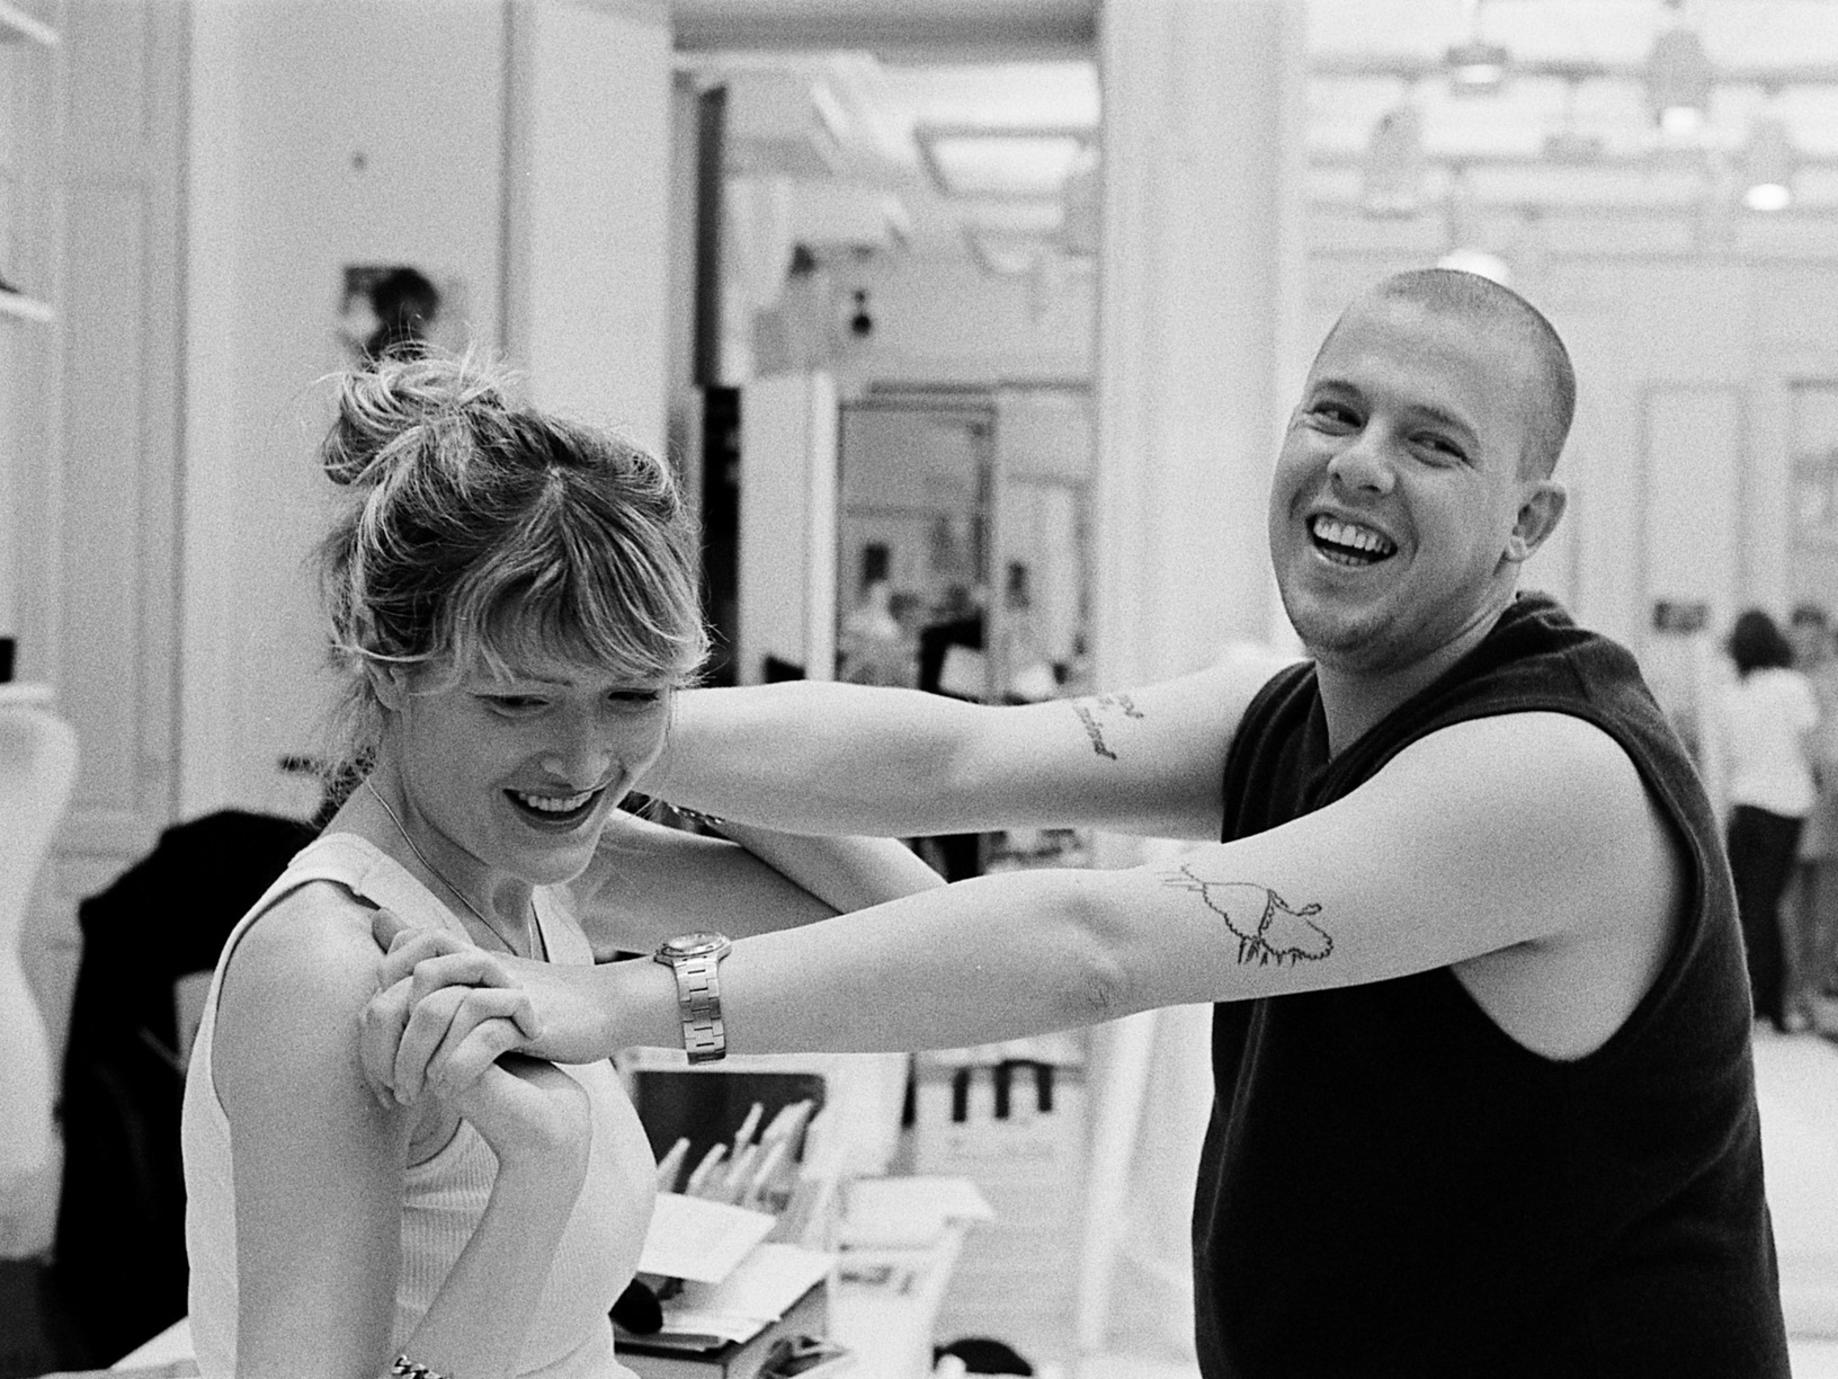 Remembering Alexander McQueen: What was your favorite creation?